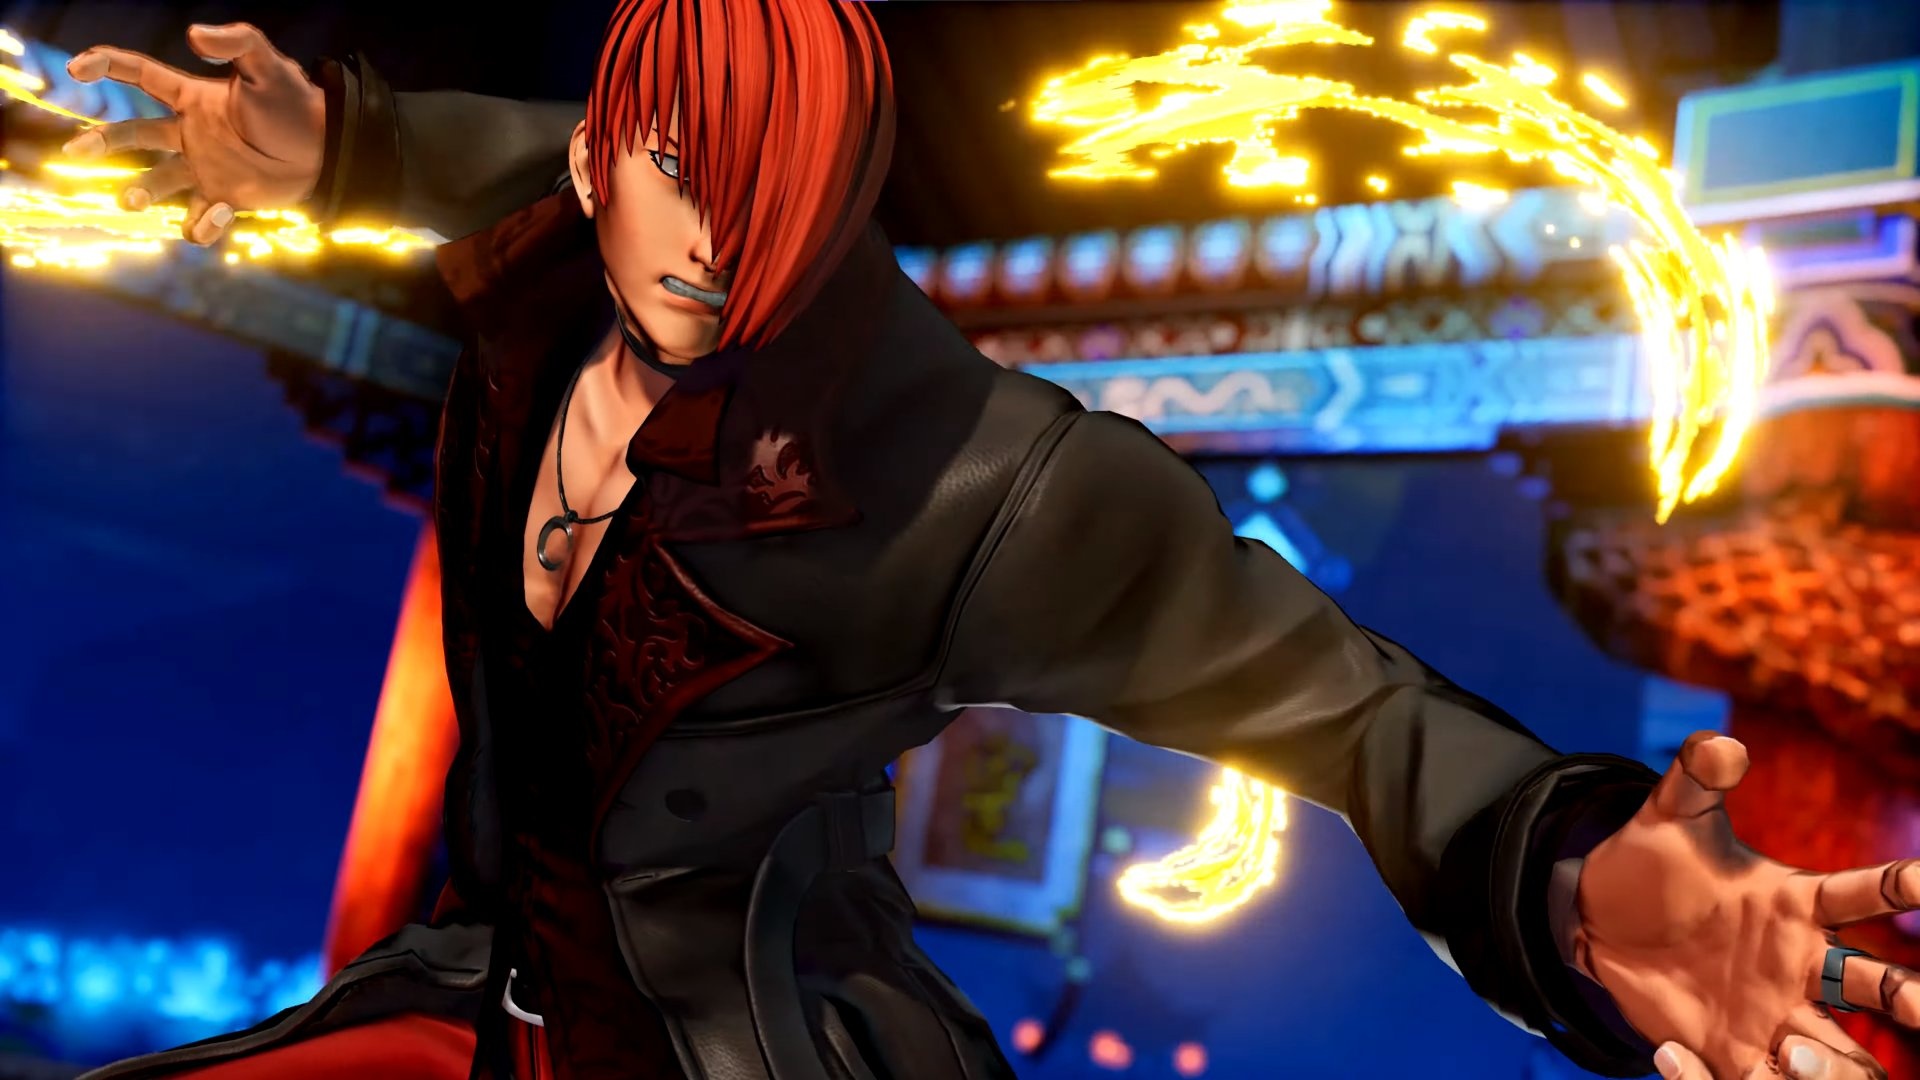 Iori Yagami, Gaming character, The King of Fighters XV, Trailer reveal, 1920x1080 Full HD Desktop